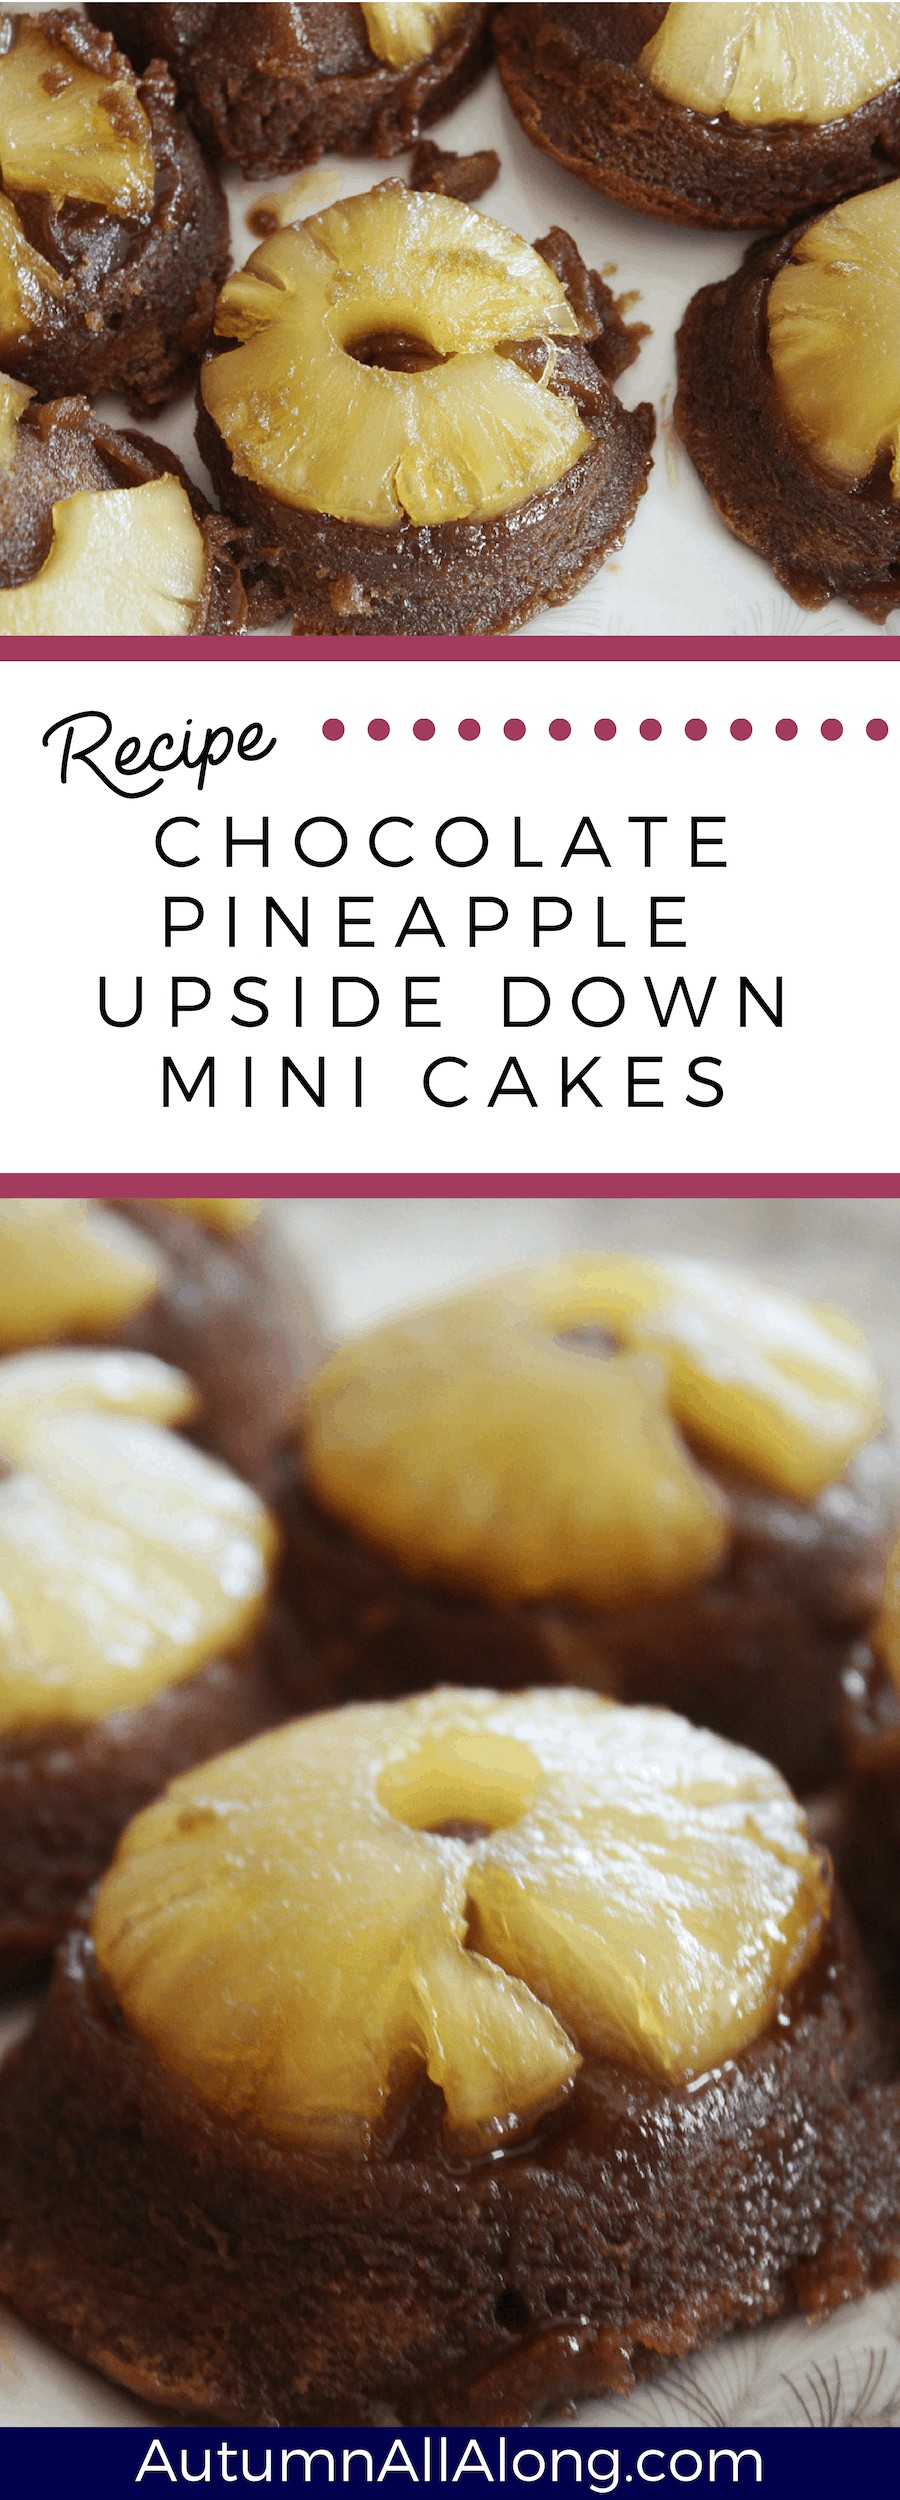 Chocolate pineapple upside down mini cakes | This recipe made my house smell so delicious and there weren't any leftover mini cakes to take home! I'll definitely be repeating this one! | via Autumn All Along